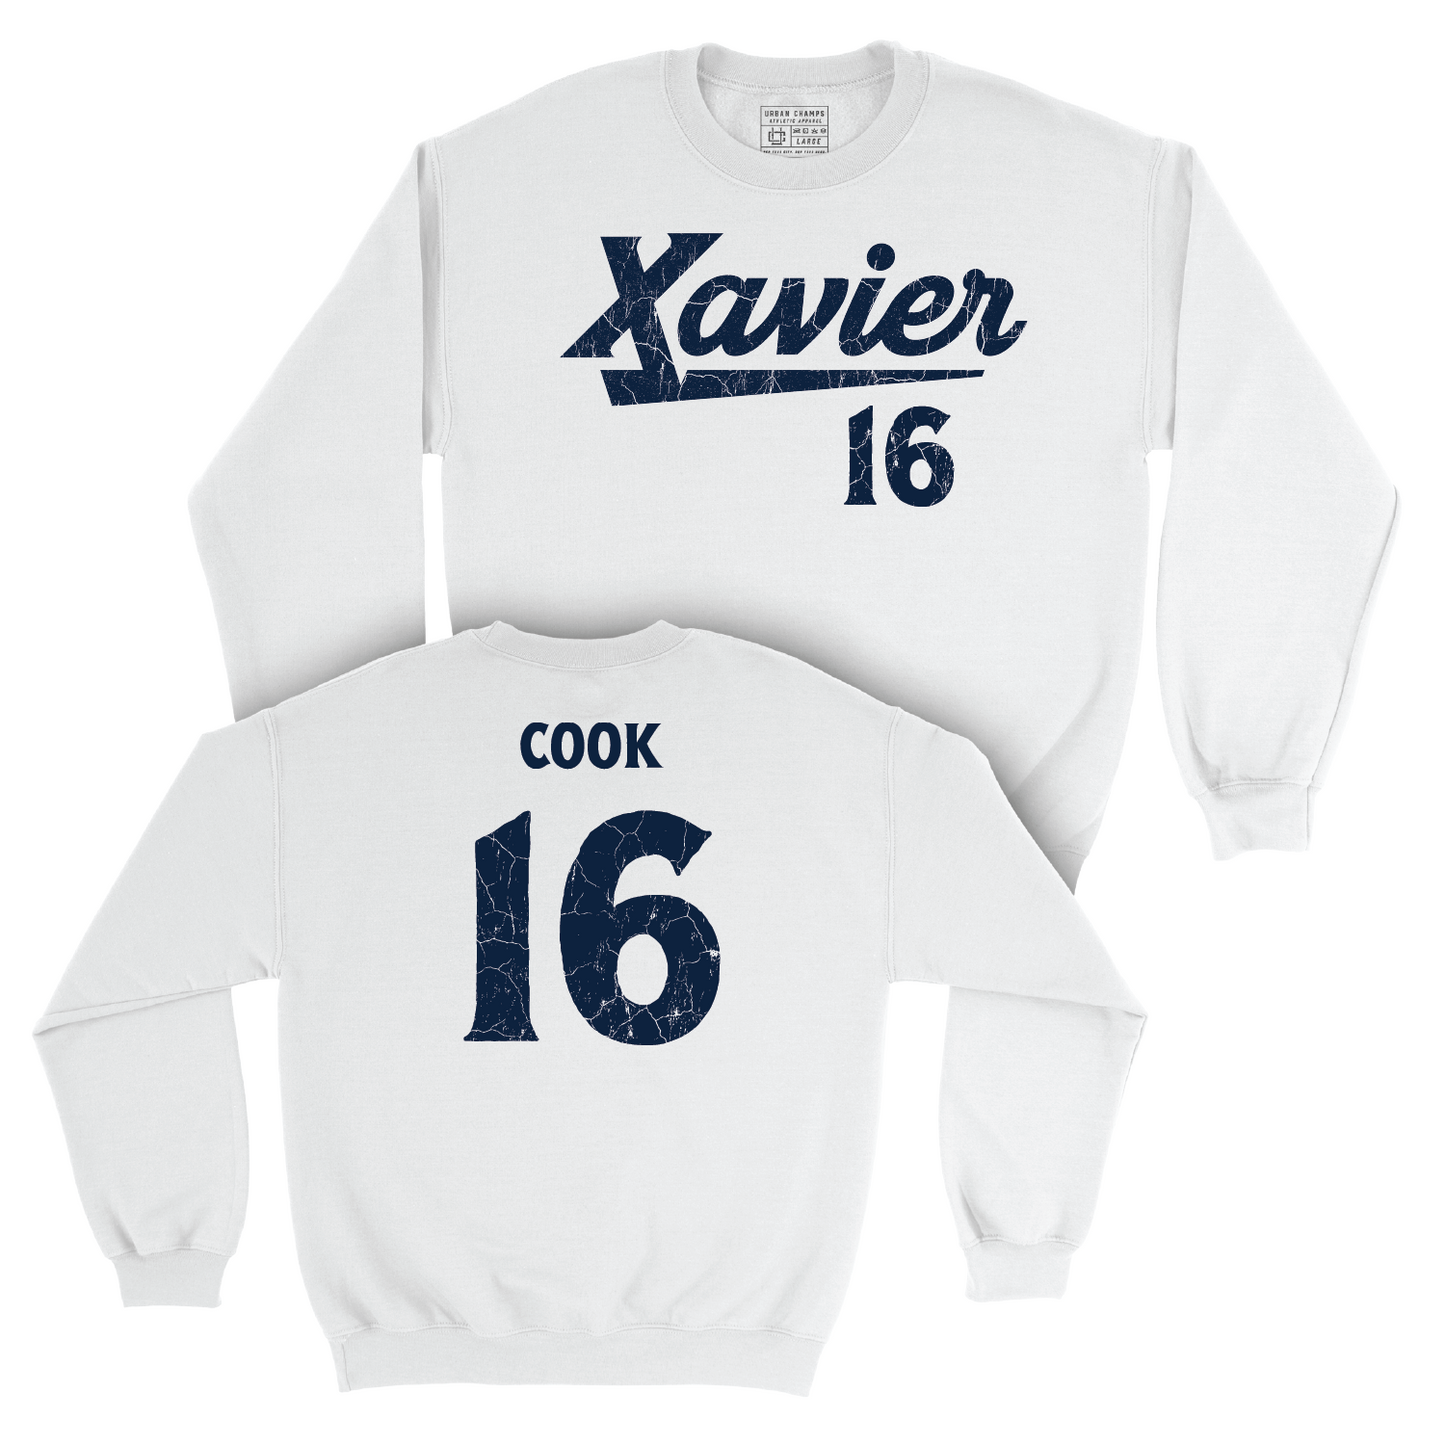 Baseball White Script Crew - Aiden Cook Youth Small